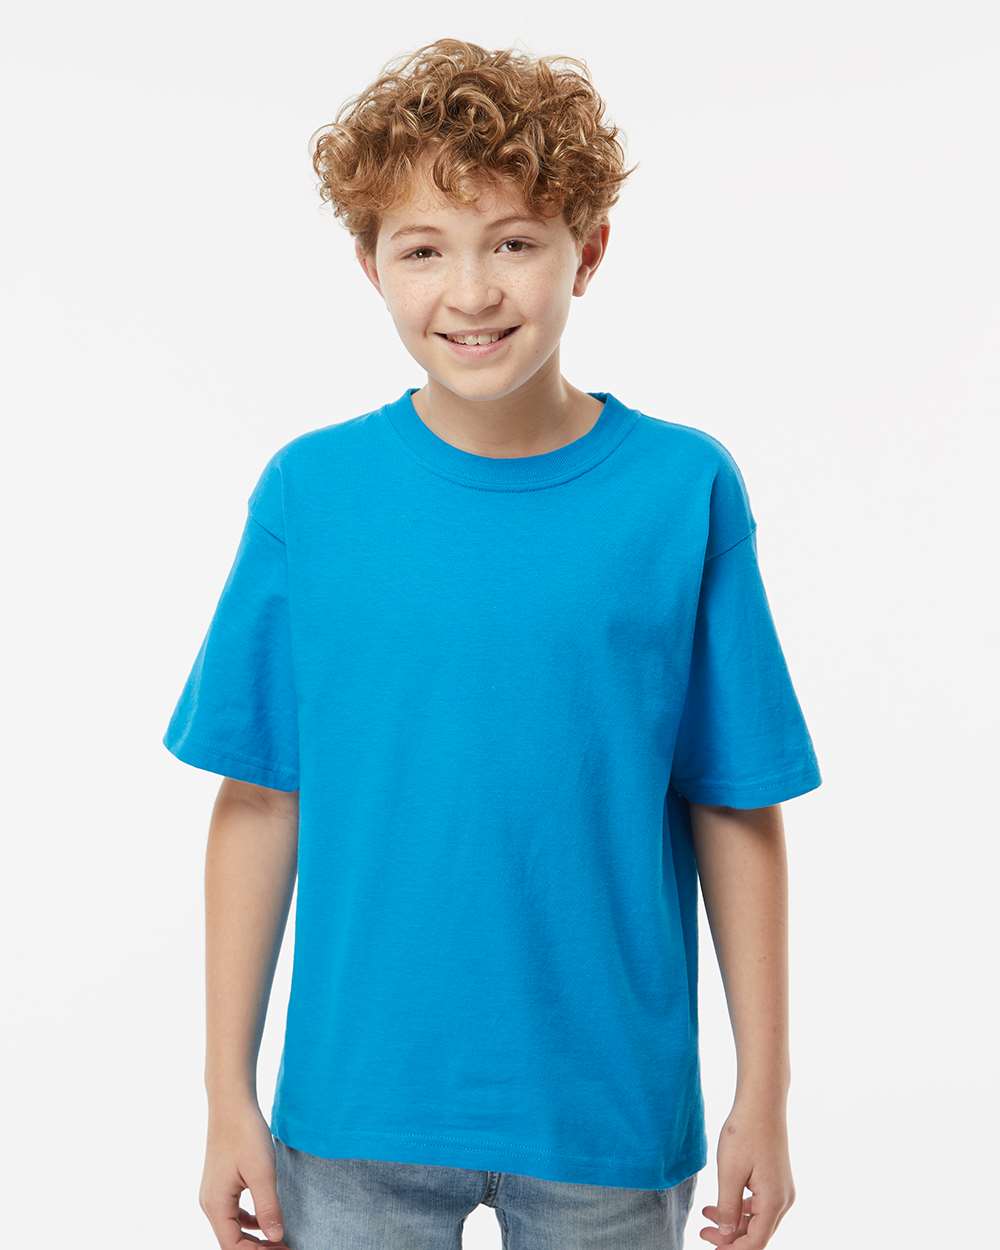 M&O Youth Gold Soft Touch T-Shirt 4850 #colormdl_Sapphire